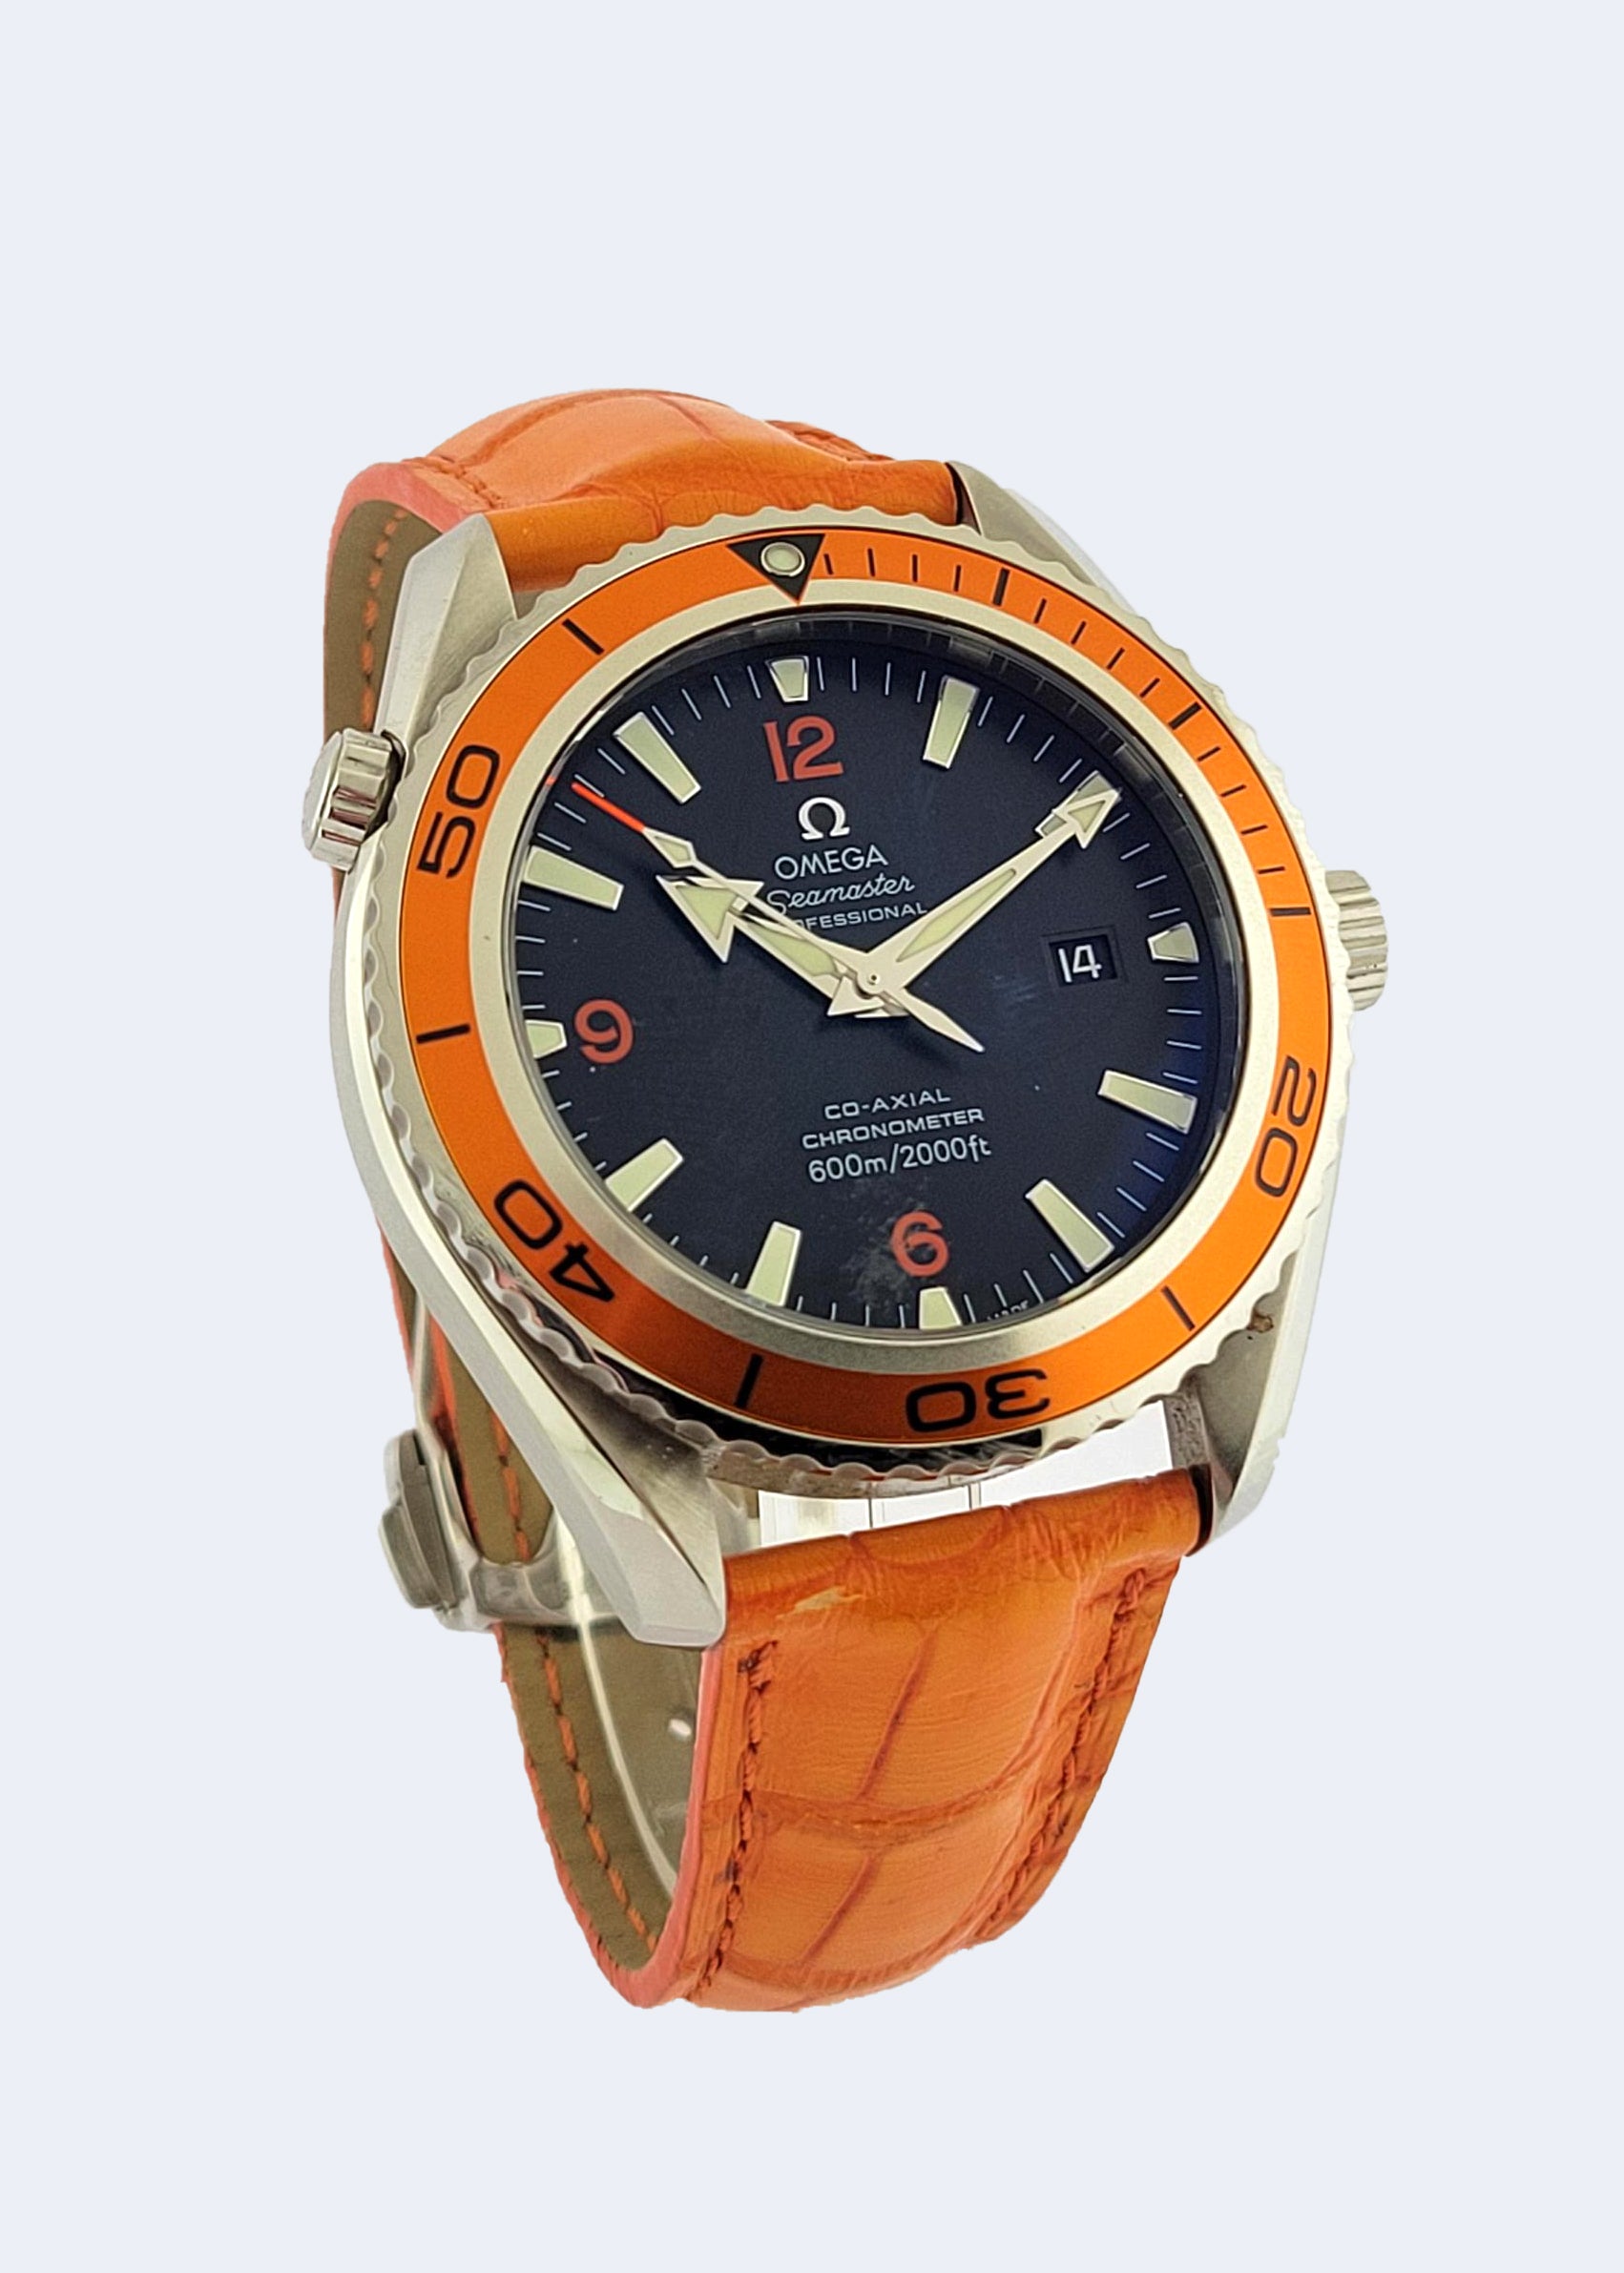 S/S Omega Seamaster Professional Co-Axial "Planet Ocean" Year 2011